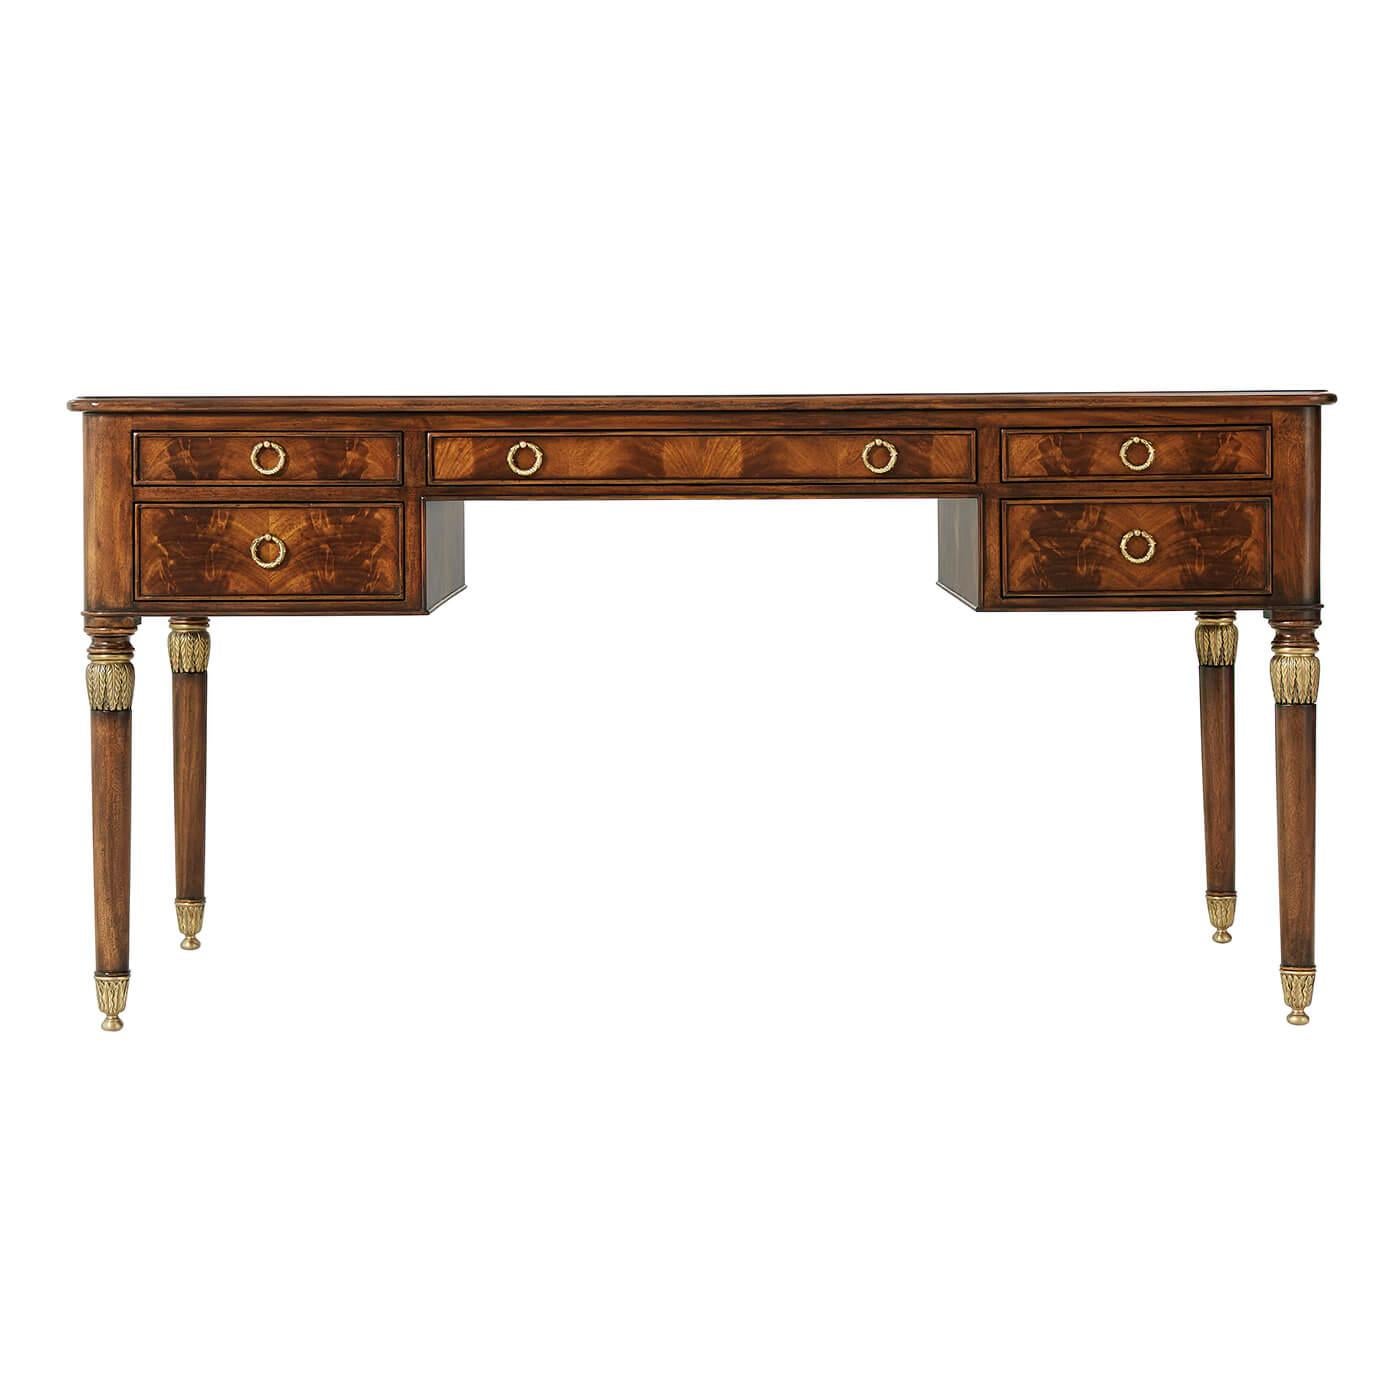 A flame mahogany writing desk, with leather inlaid side slides and five drawers surrounding the kneehole, on turned and brass leaf mounted tapering legs. The original Napoleon III.

Dimensions: 60